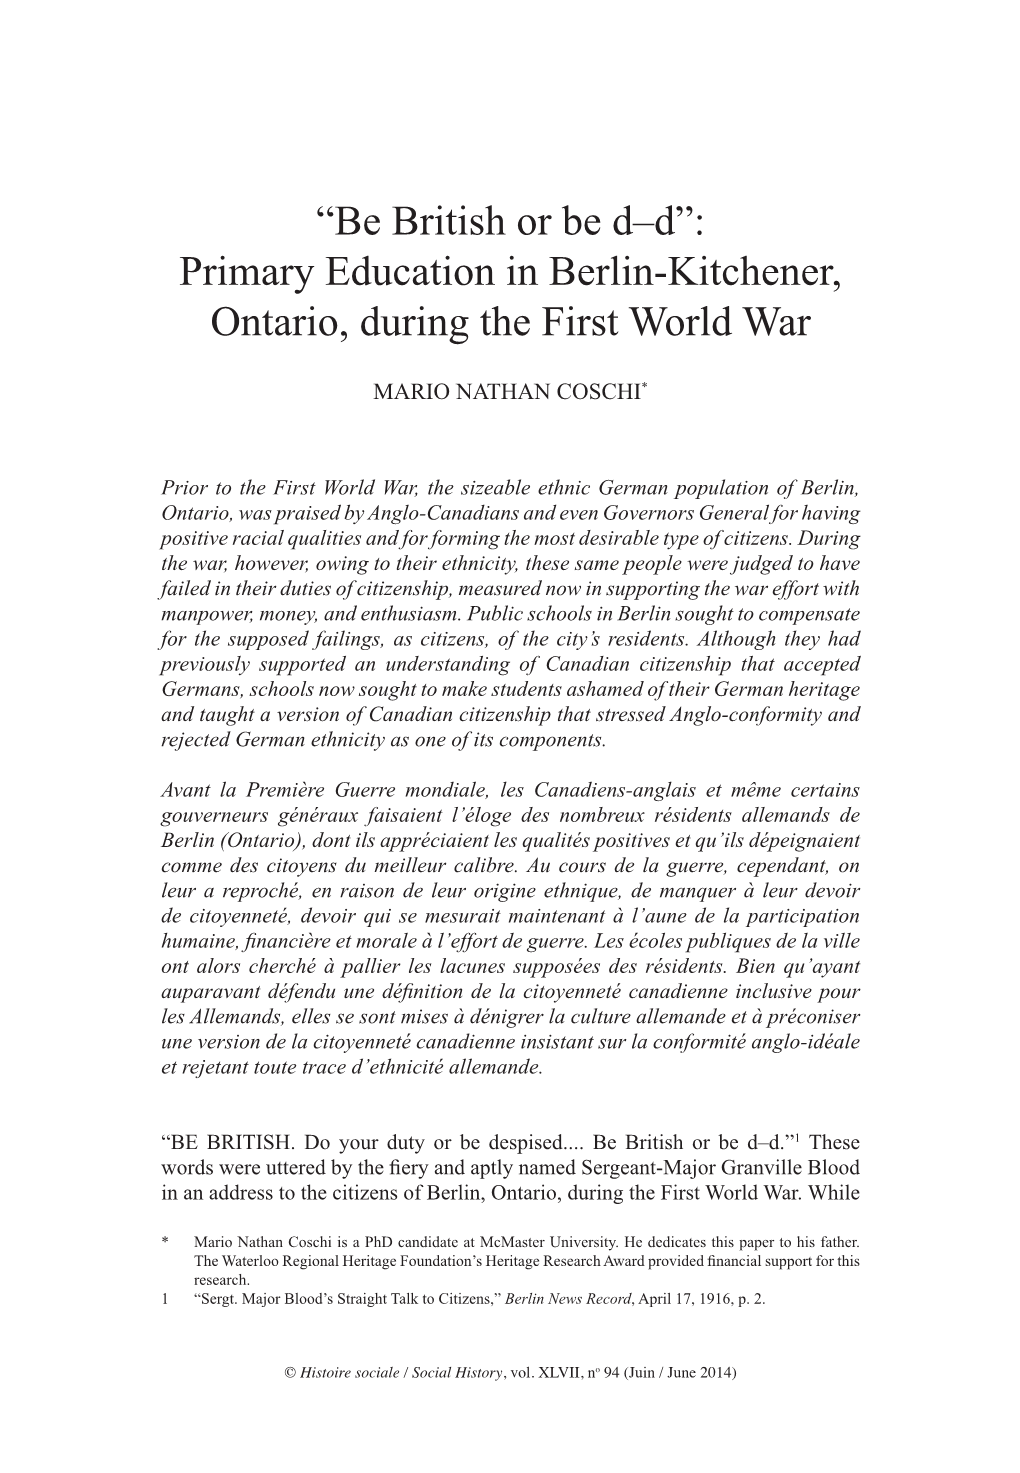 “Be British Or Be D–D”: Primary Education in Berlin-Kitchener, Ontario, During the First World War